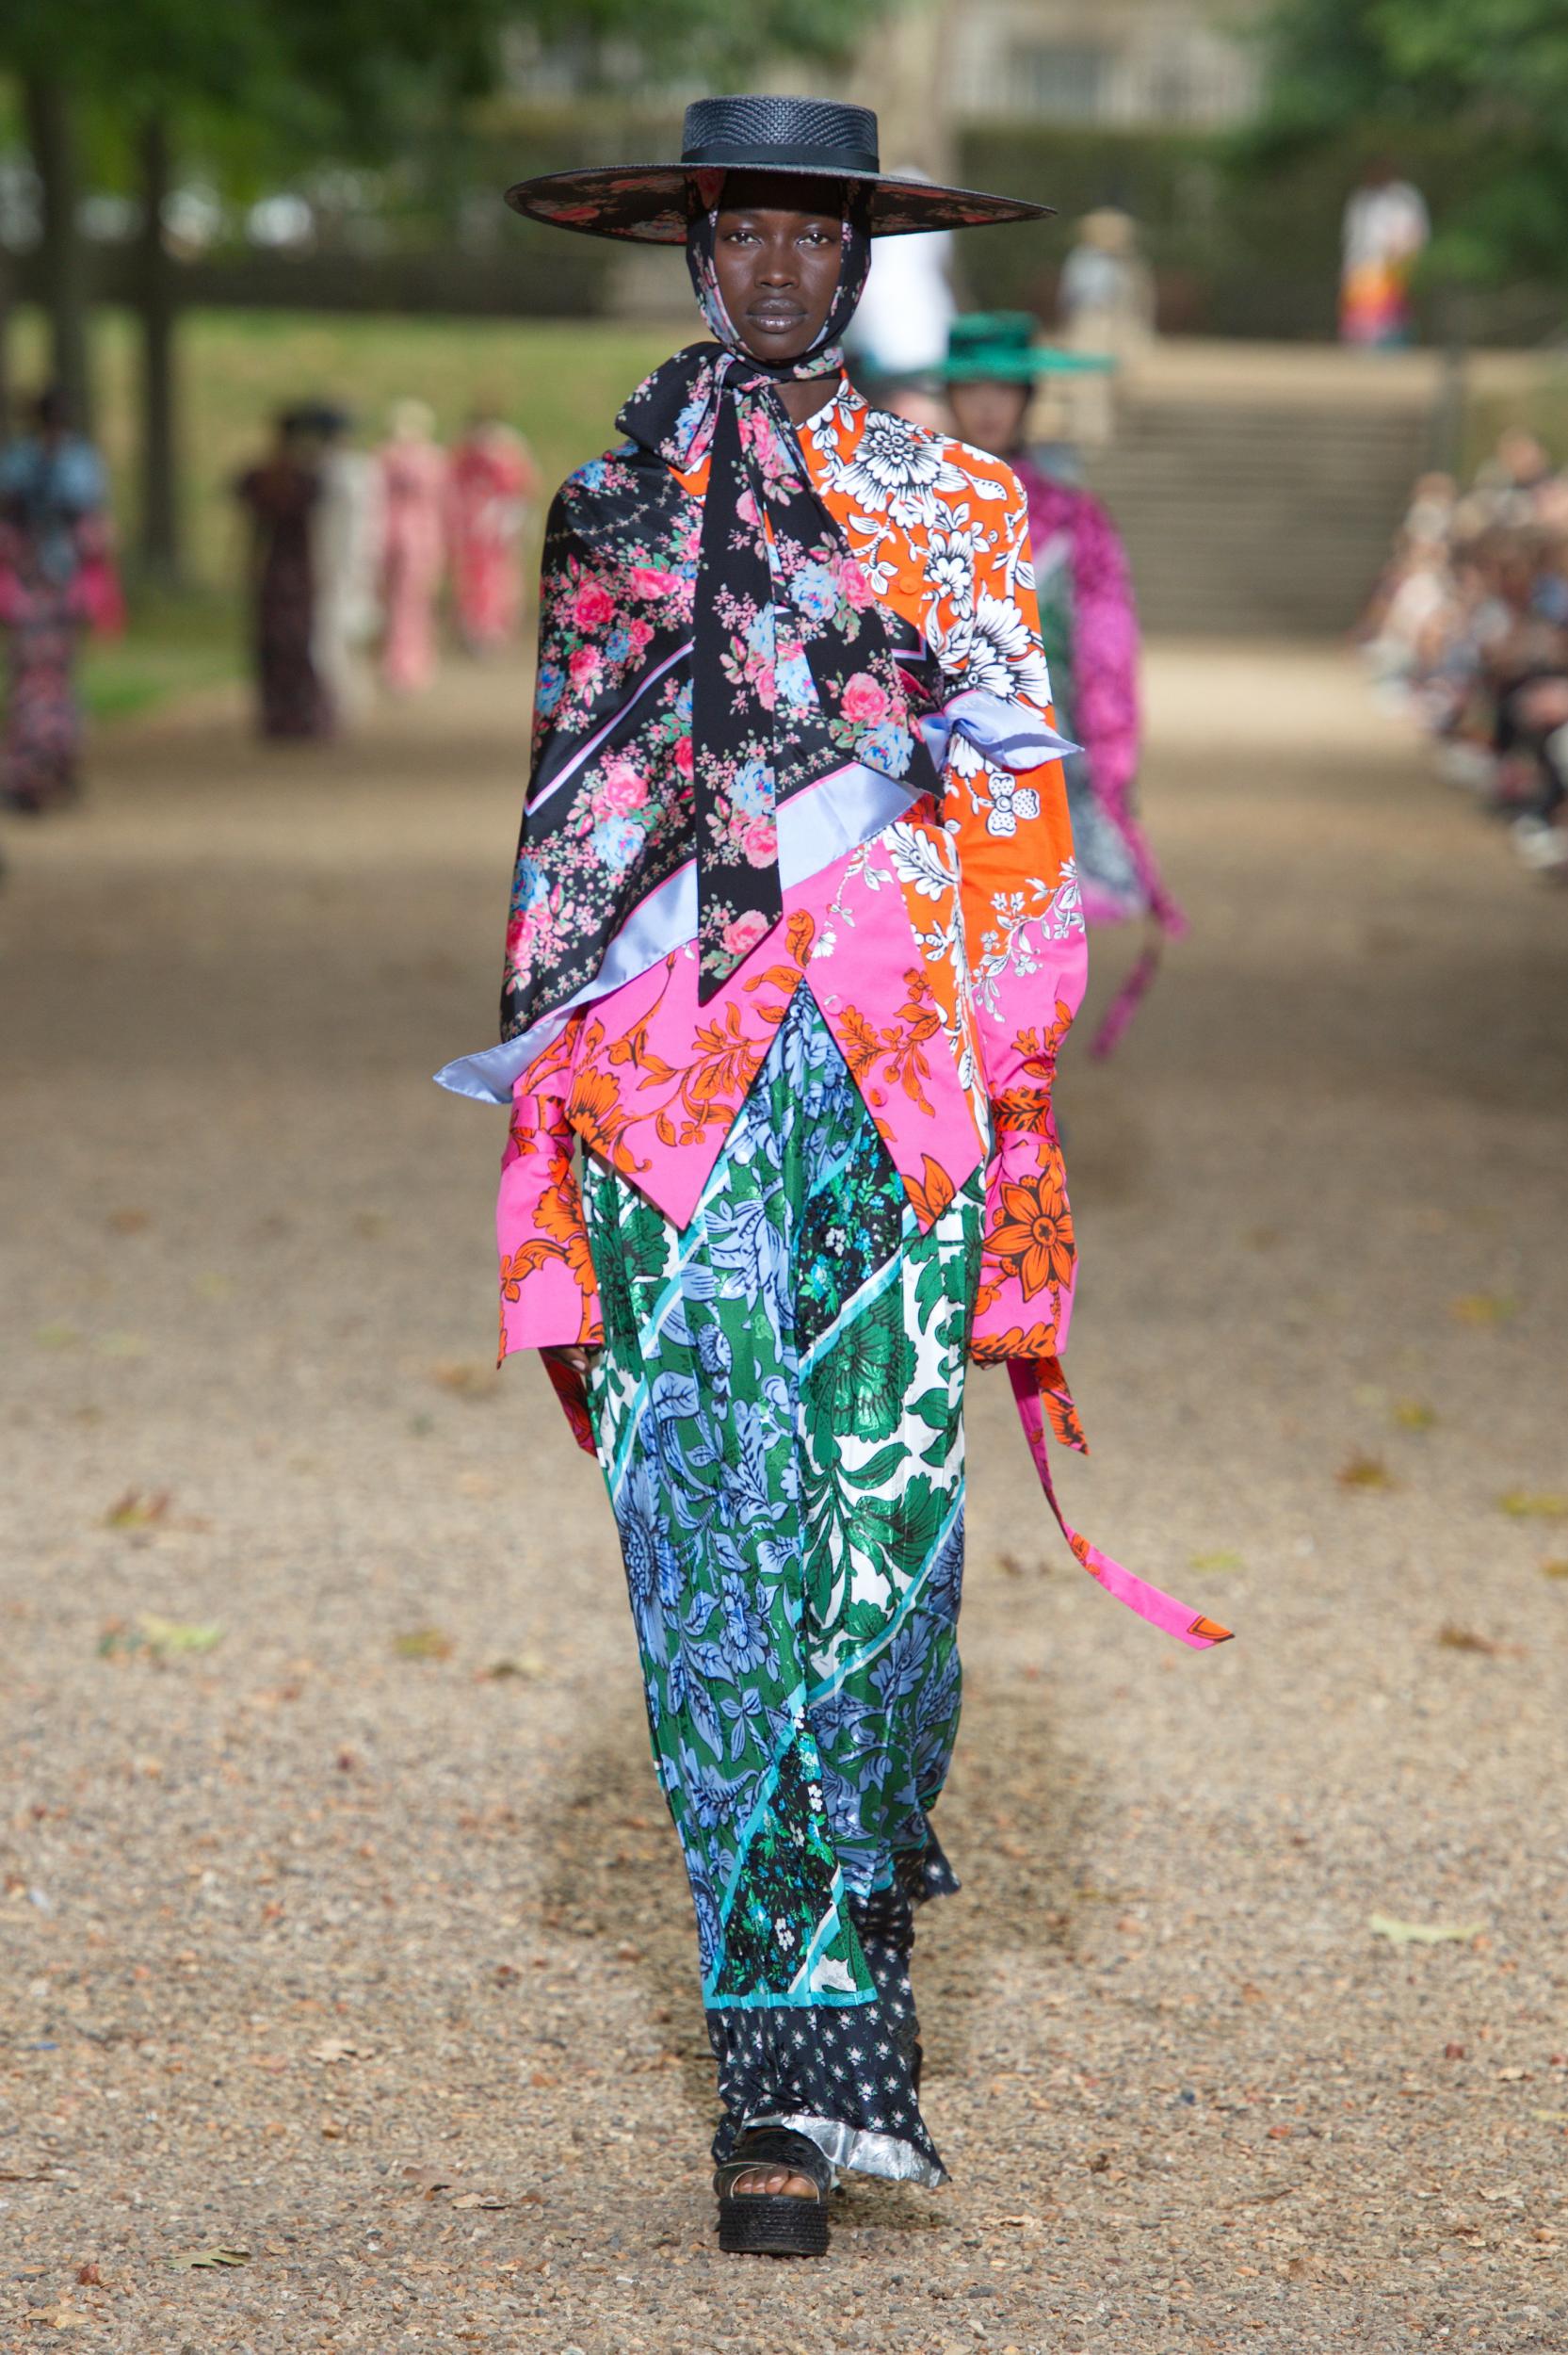 Bold prints and over the top accessories were front and centre in Erdem’s presentation